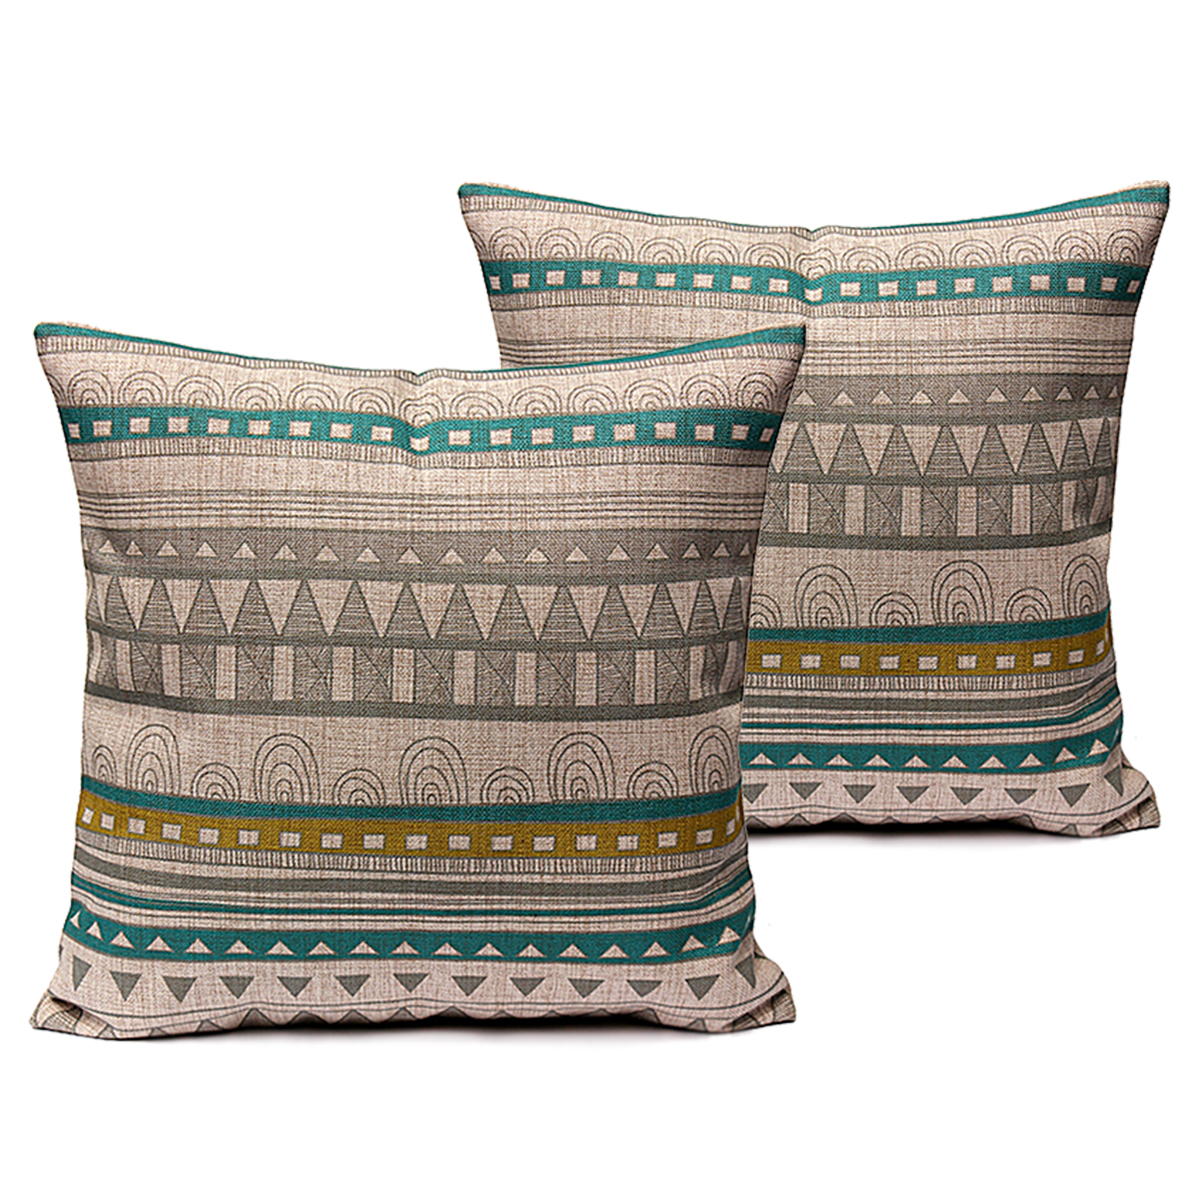 Minimalist-Style-Pillow-Case-Home-Linen-Cushion-Cover-Fashion-Colorful-Geometric-Patterns-951098-9